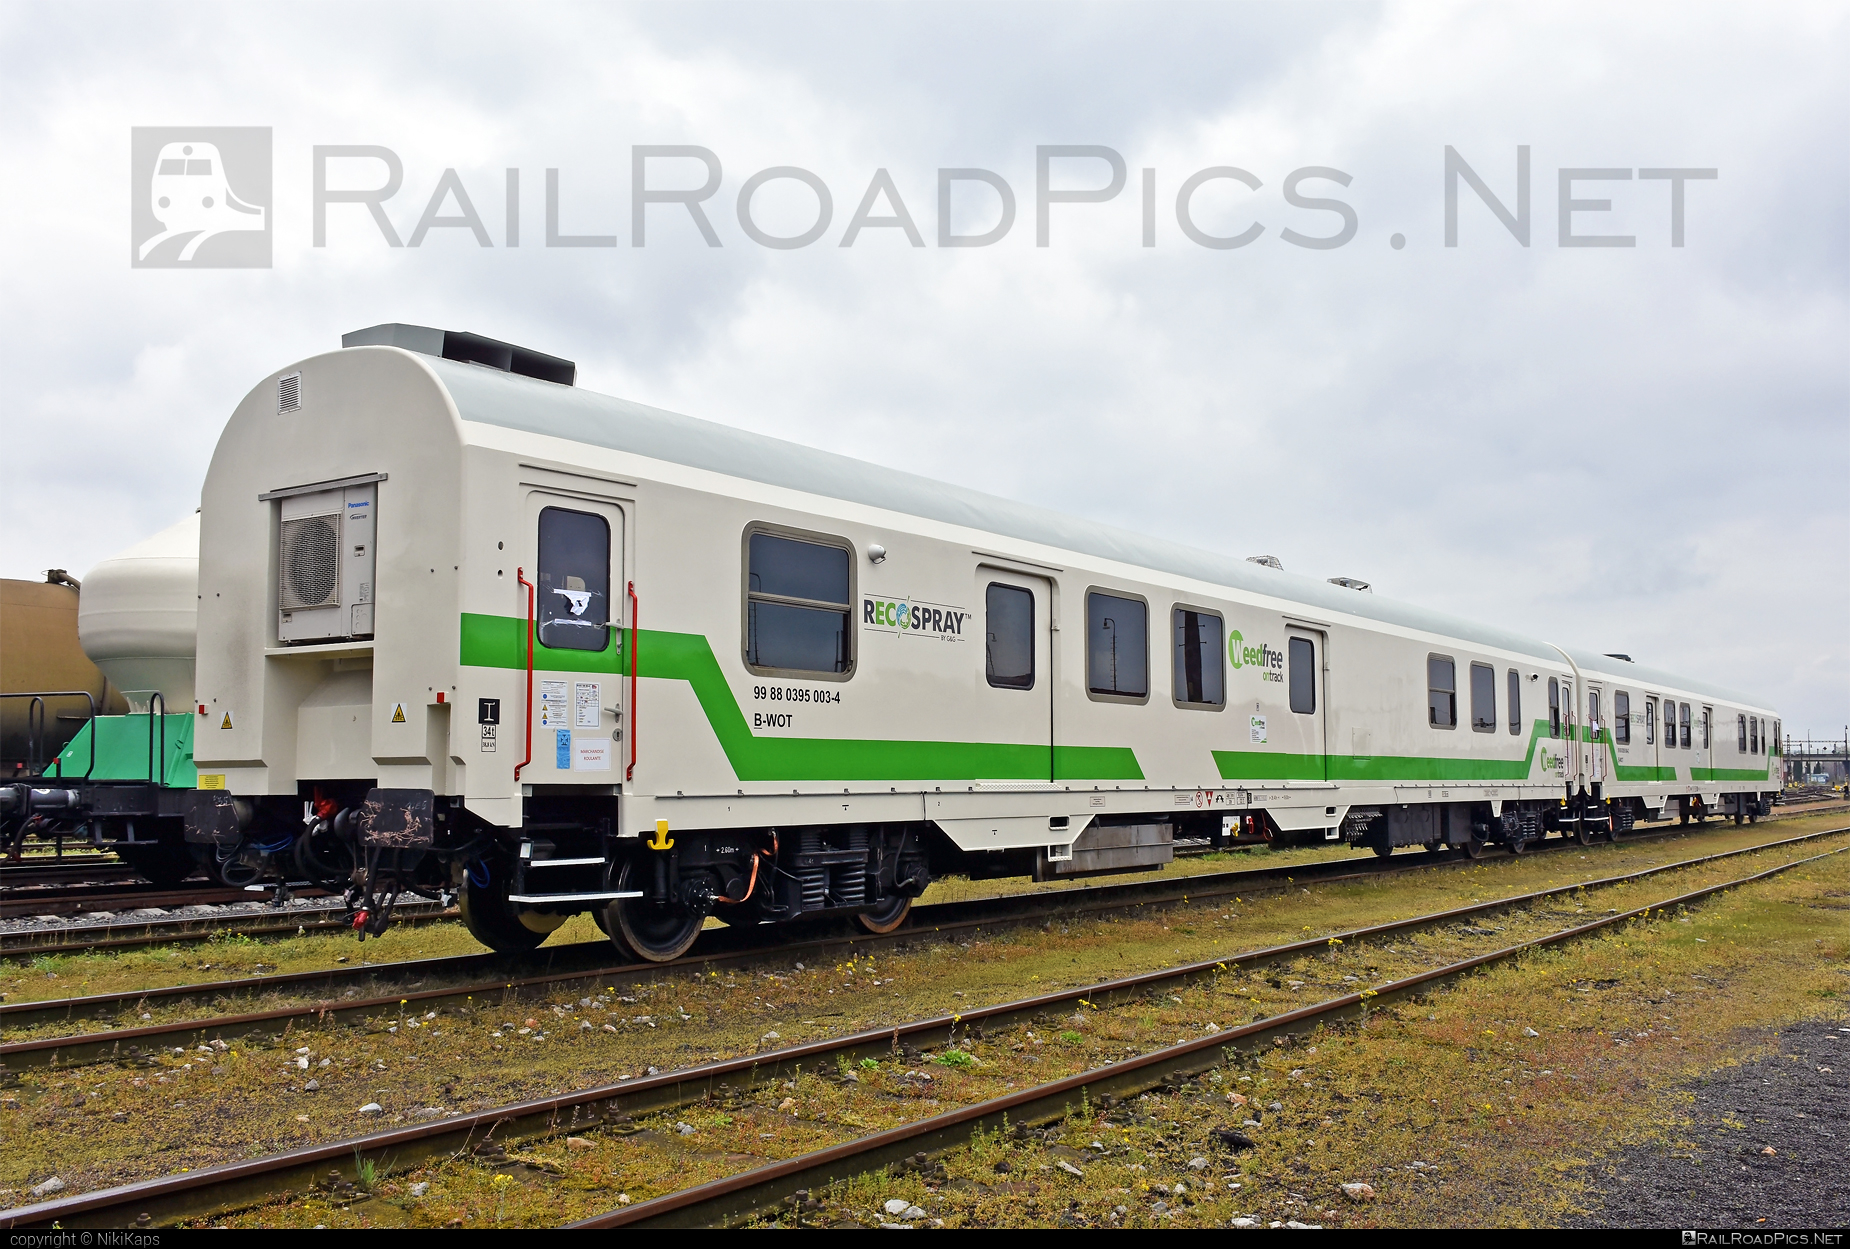 G&G Kft. Railway Weed Control Train (5th generation) - 395 003-4 operated by WEEDFREE ON TRACK #ggKft #railwayWeedControlTrain #recospray #weedfreeontrack #wot